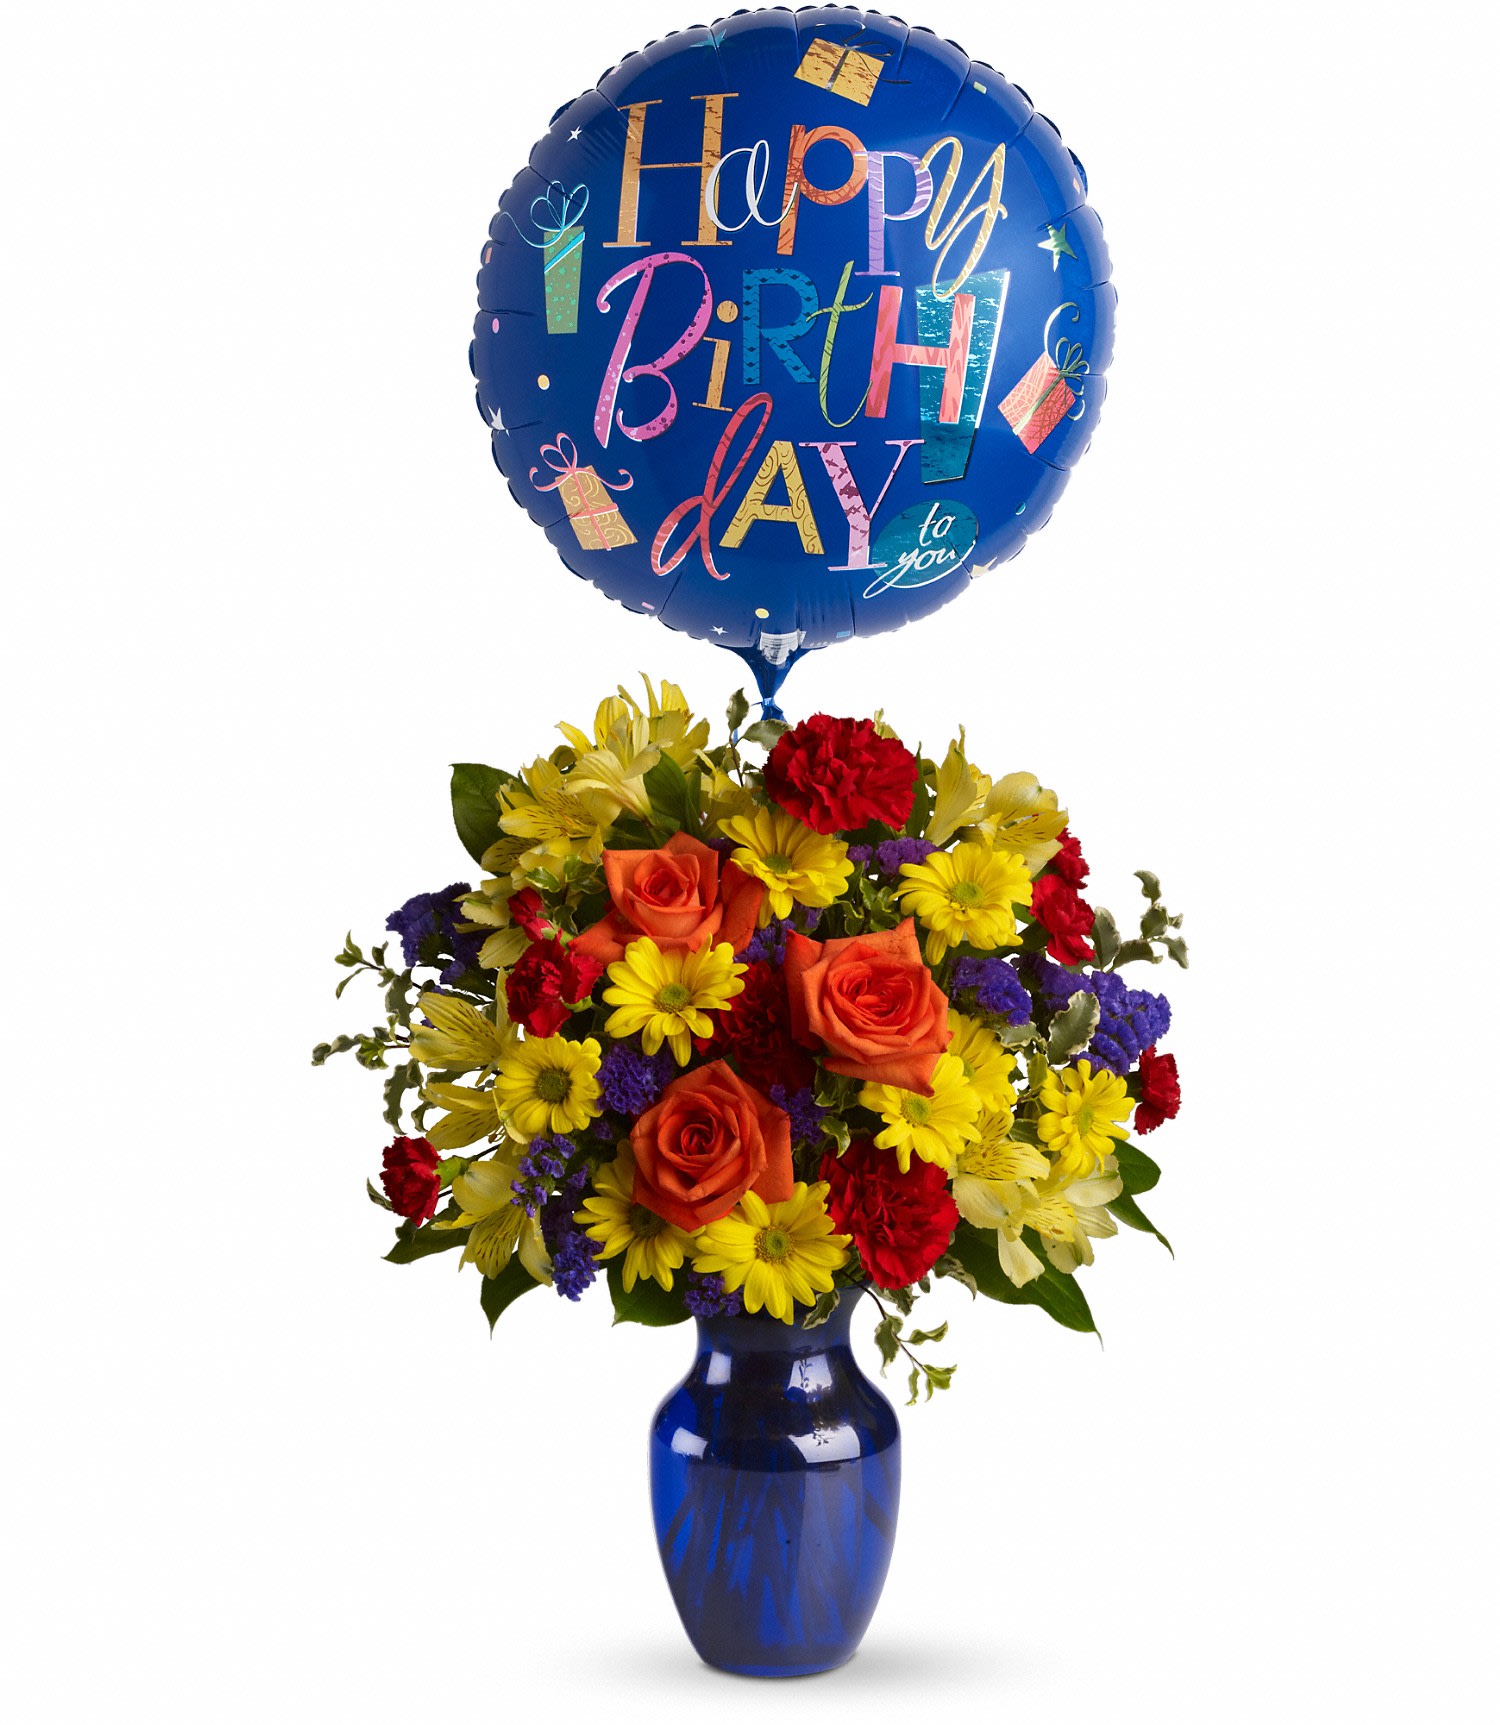 Fly Away Birthday - Brilliant orange roses, yellow alstroemeria, red carnations and miniature carnations, yellow daisy spray chrysanthemums, purple statice and a big bright balloon are all delivered in a beautiful cobalt blue vase. It's a thumbs-way-up choice in birthday gifts! Approximately 16 3/4&quot; W x 19 1/4&quot; H  T24-1A